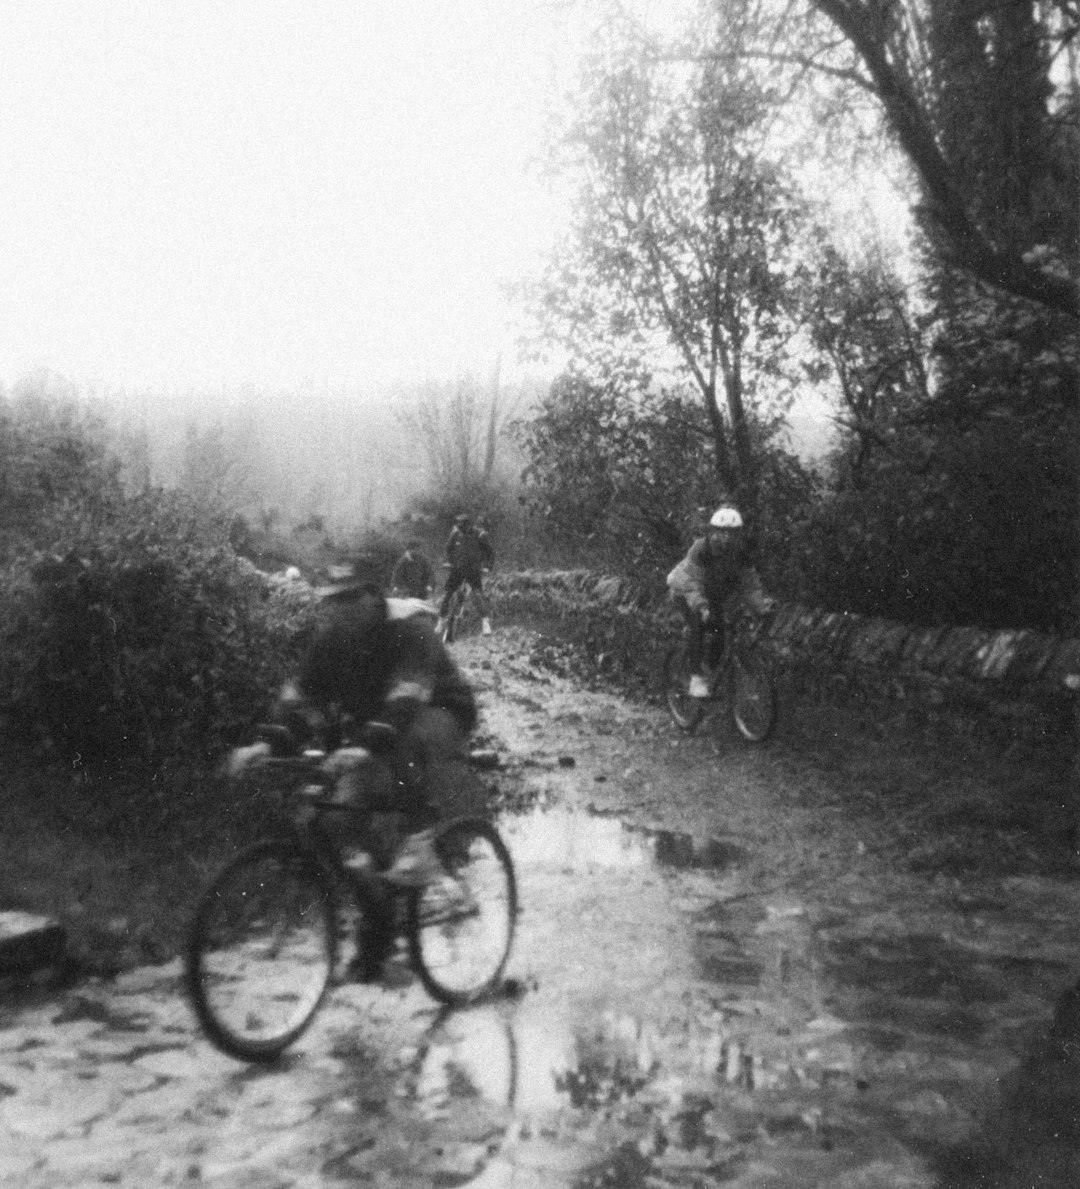 grayscale photo of people riding bicycles